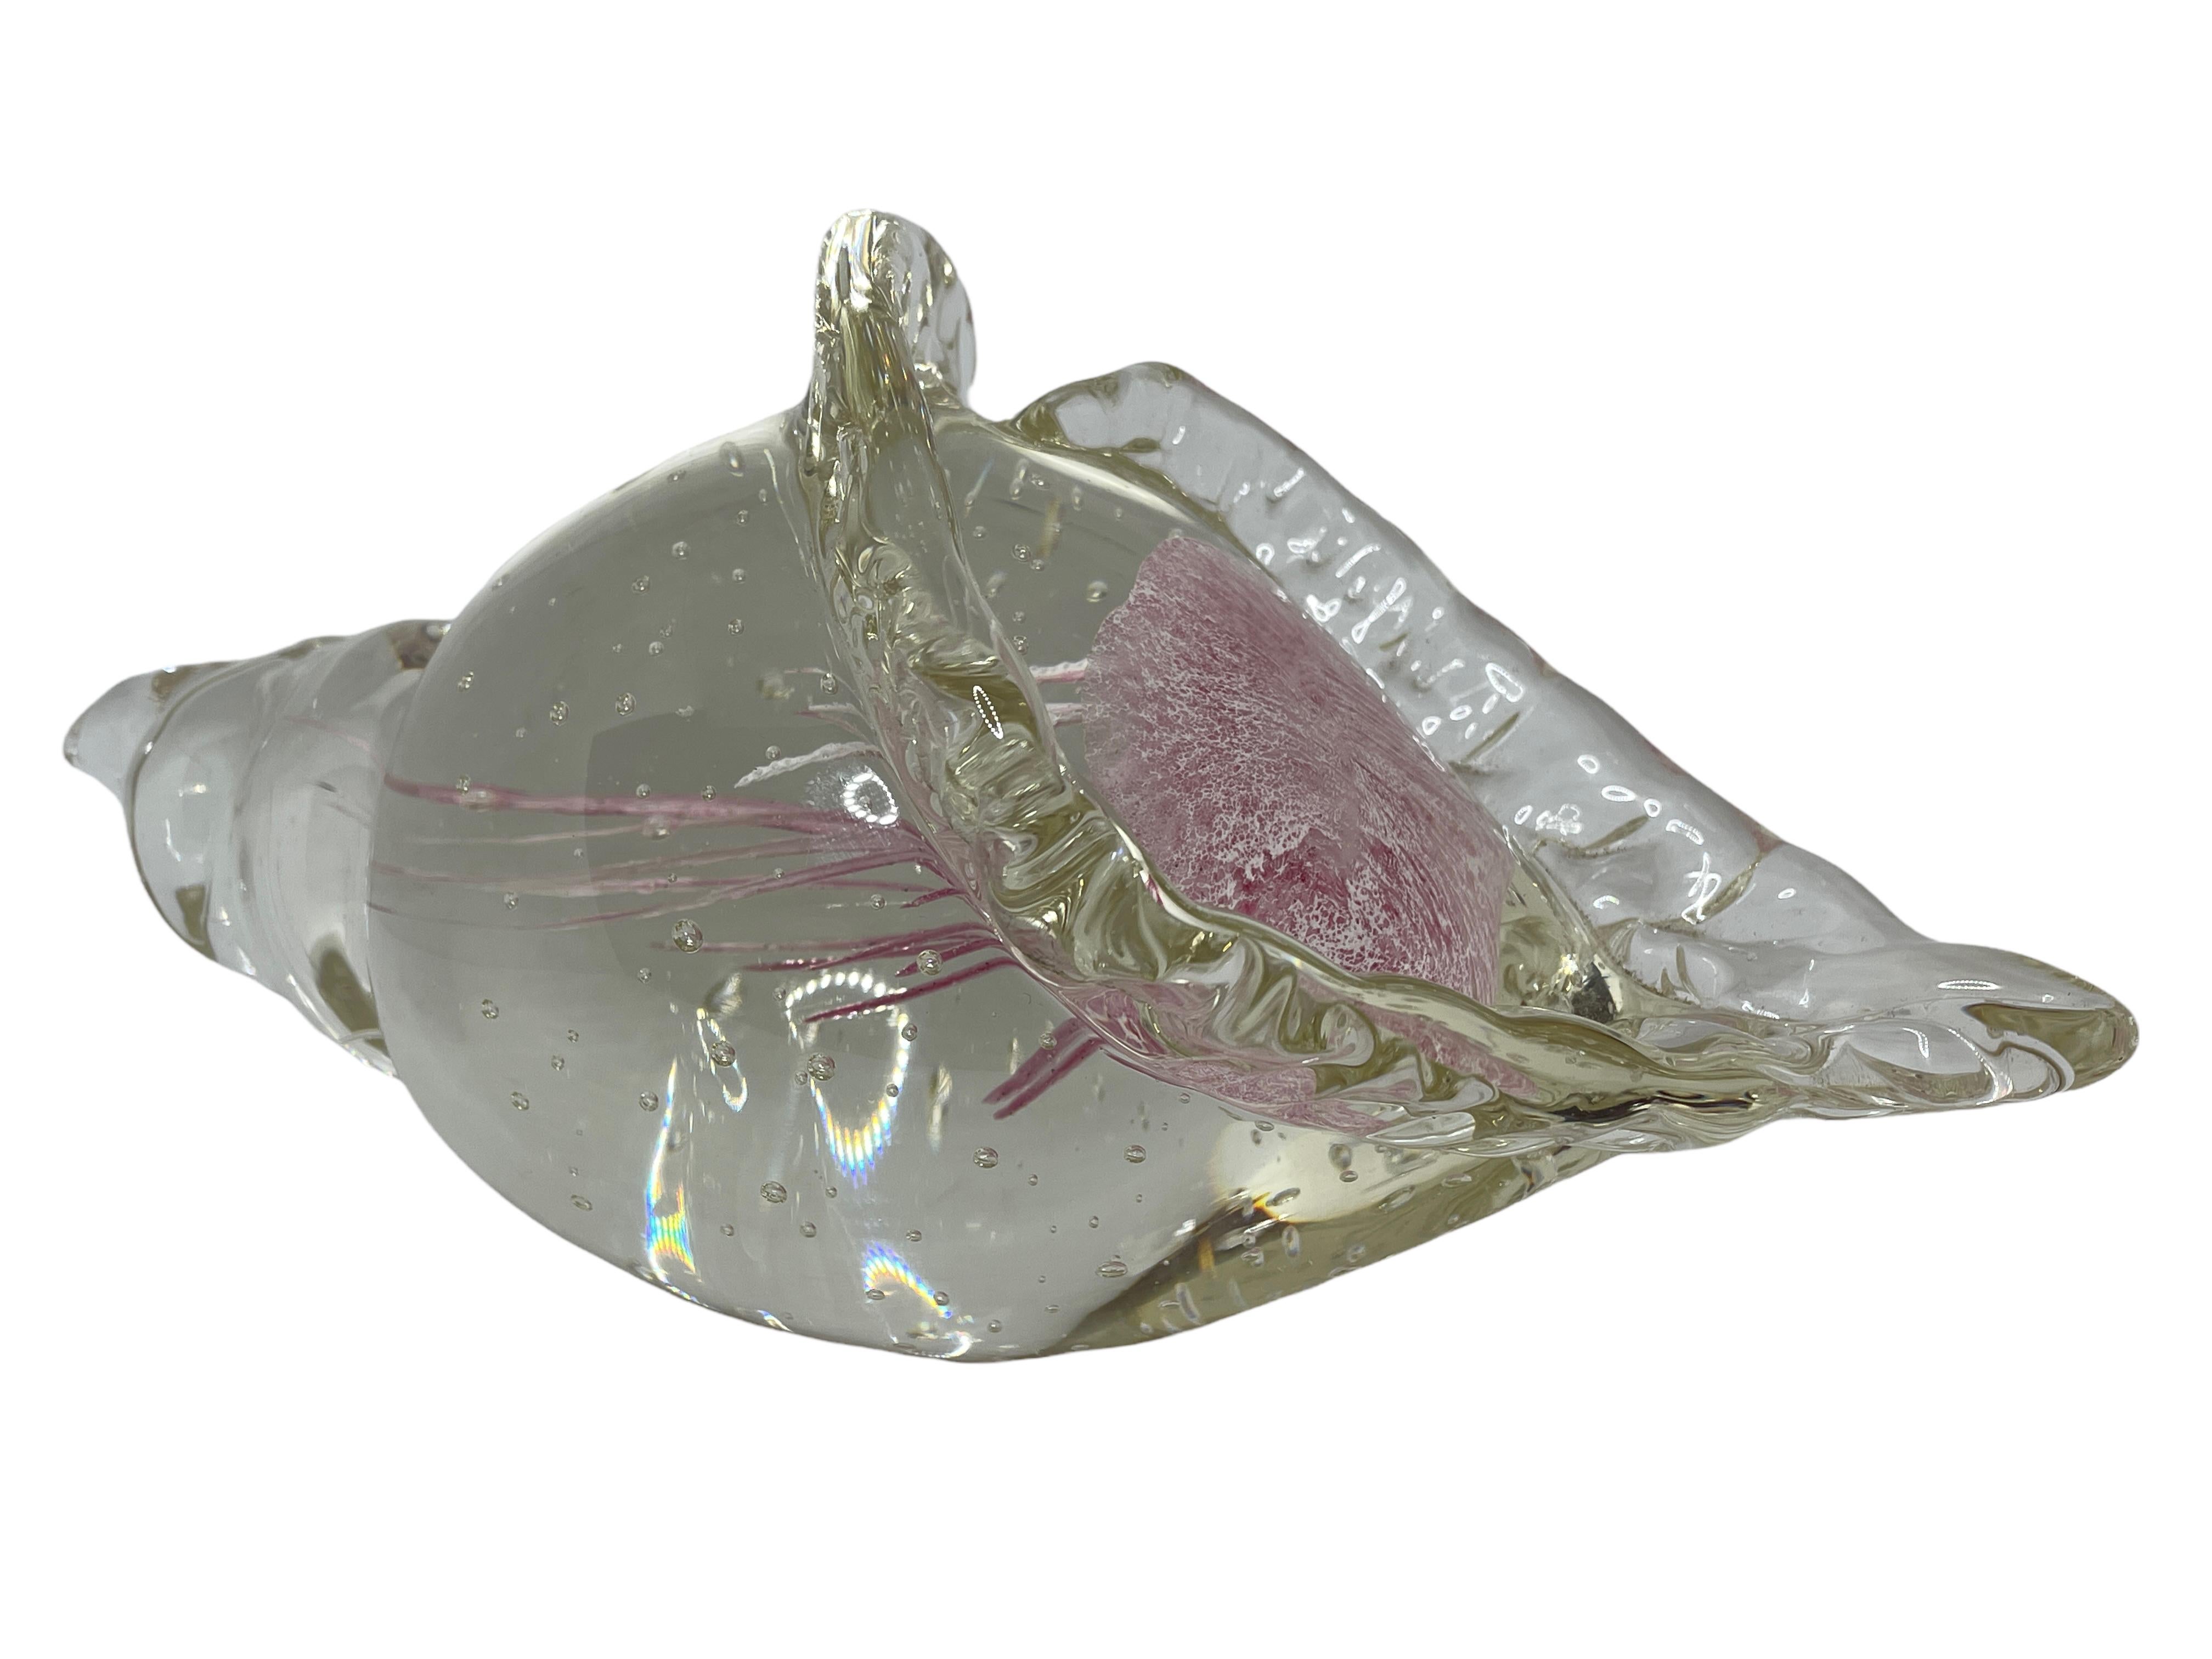 Beautiful Murano hand blown aquarium Italian art glass paper weight or statue. Showing a jellyfish, underwater floating on controlled bubbles in a conch shell. The color of the jellyfish is white and pink, the conch shell is in clear glass. A